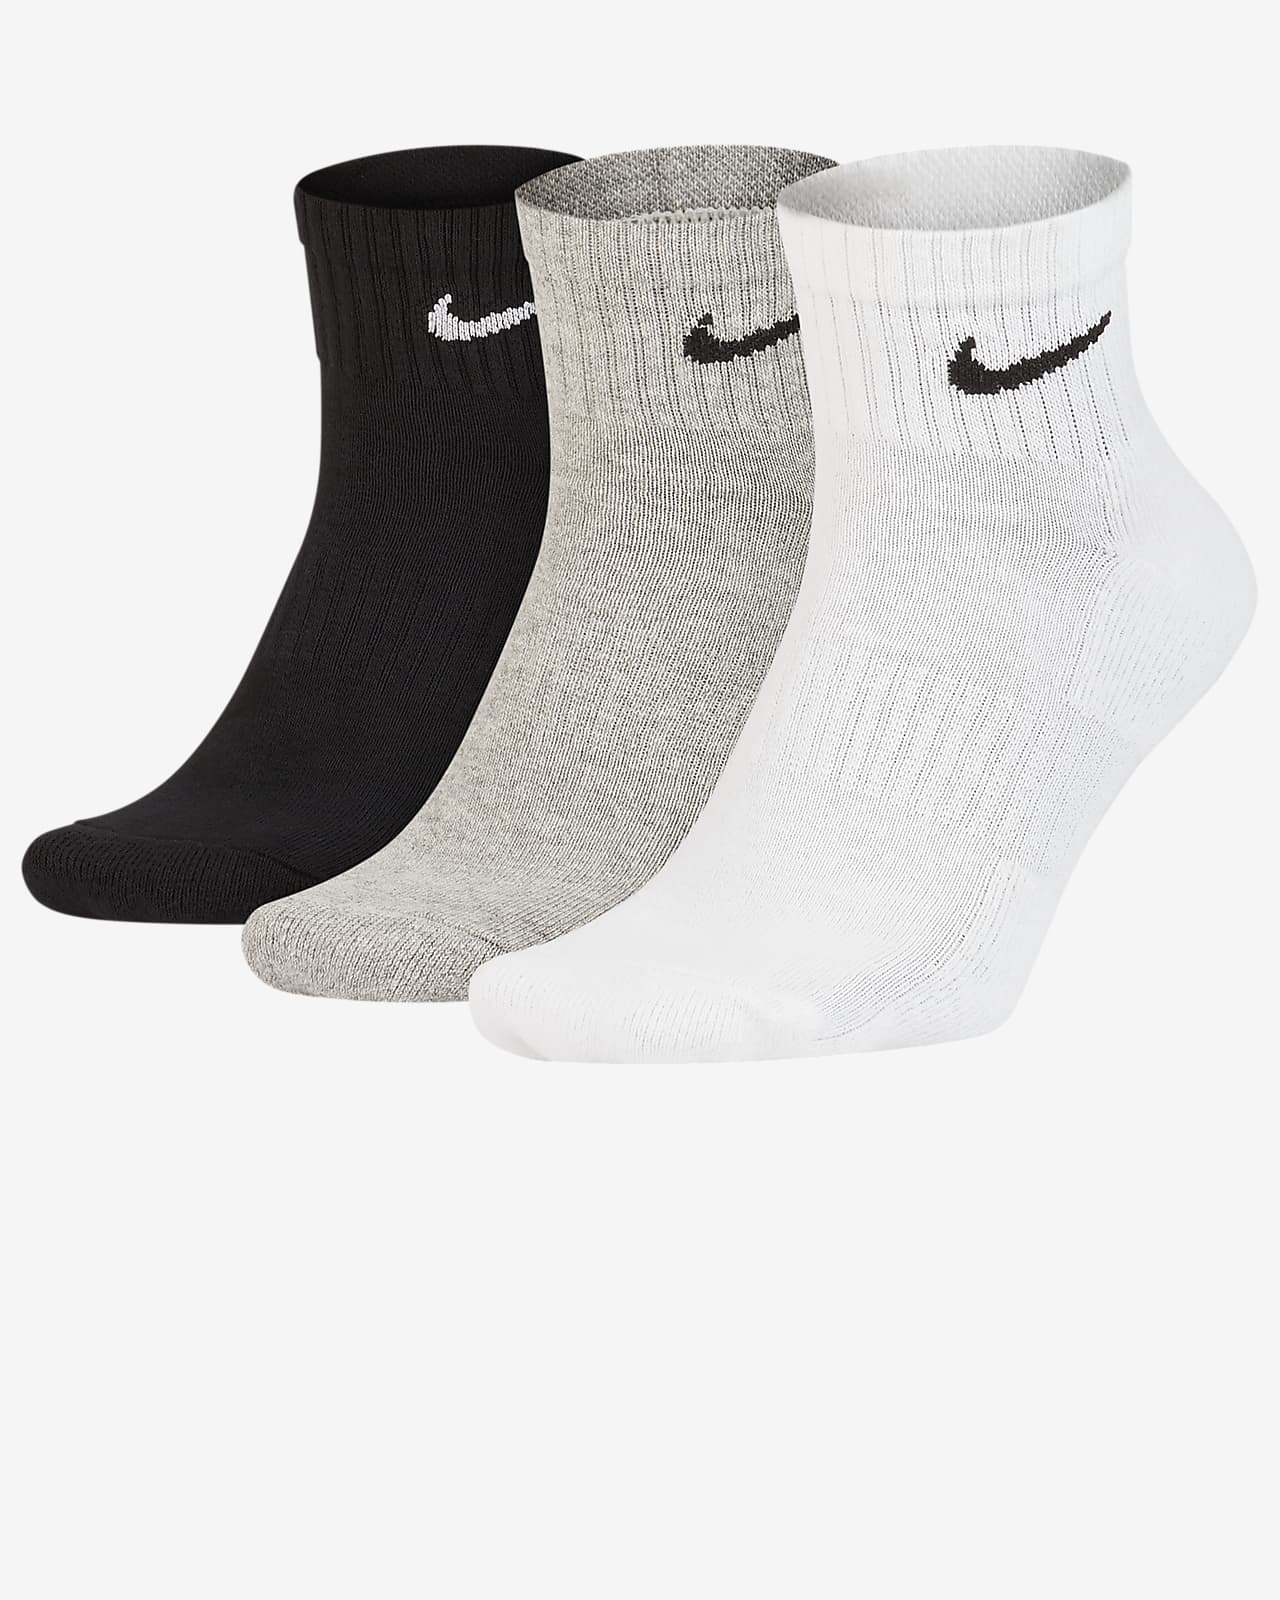 have a nike day socks